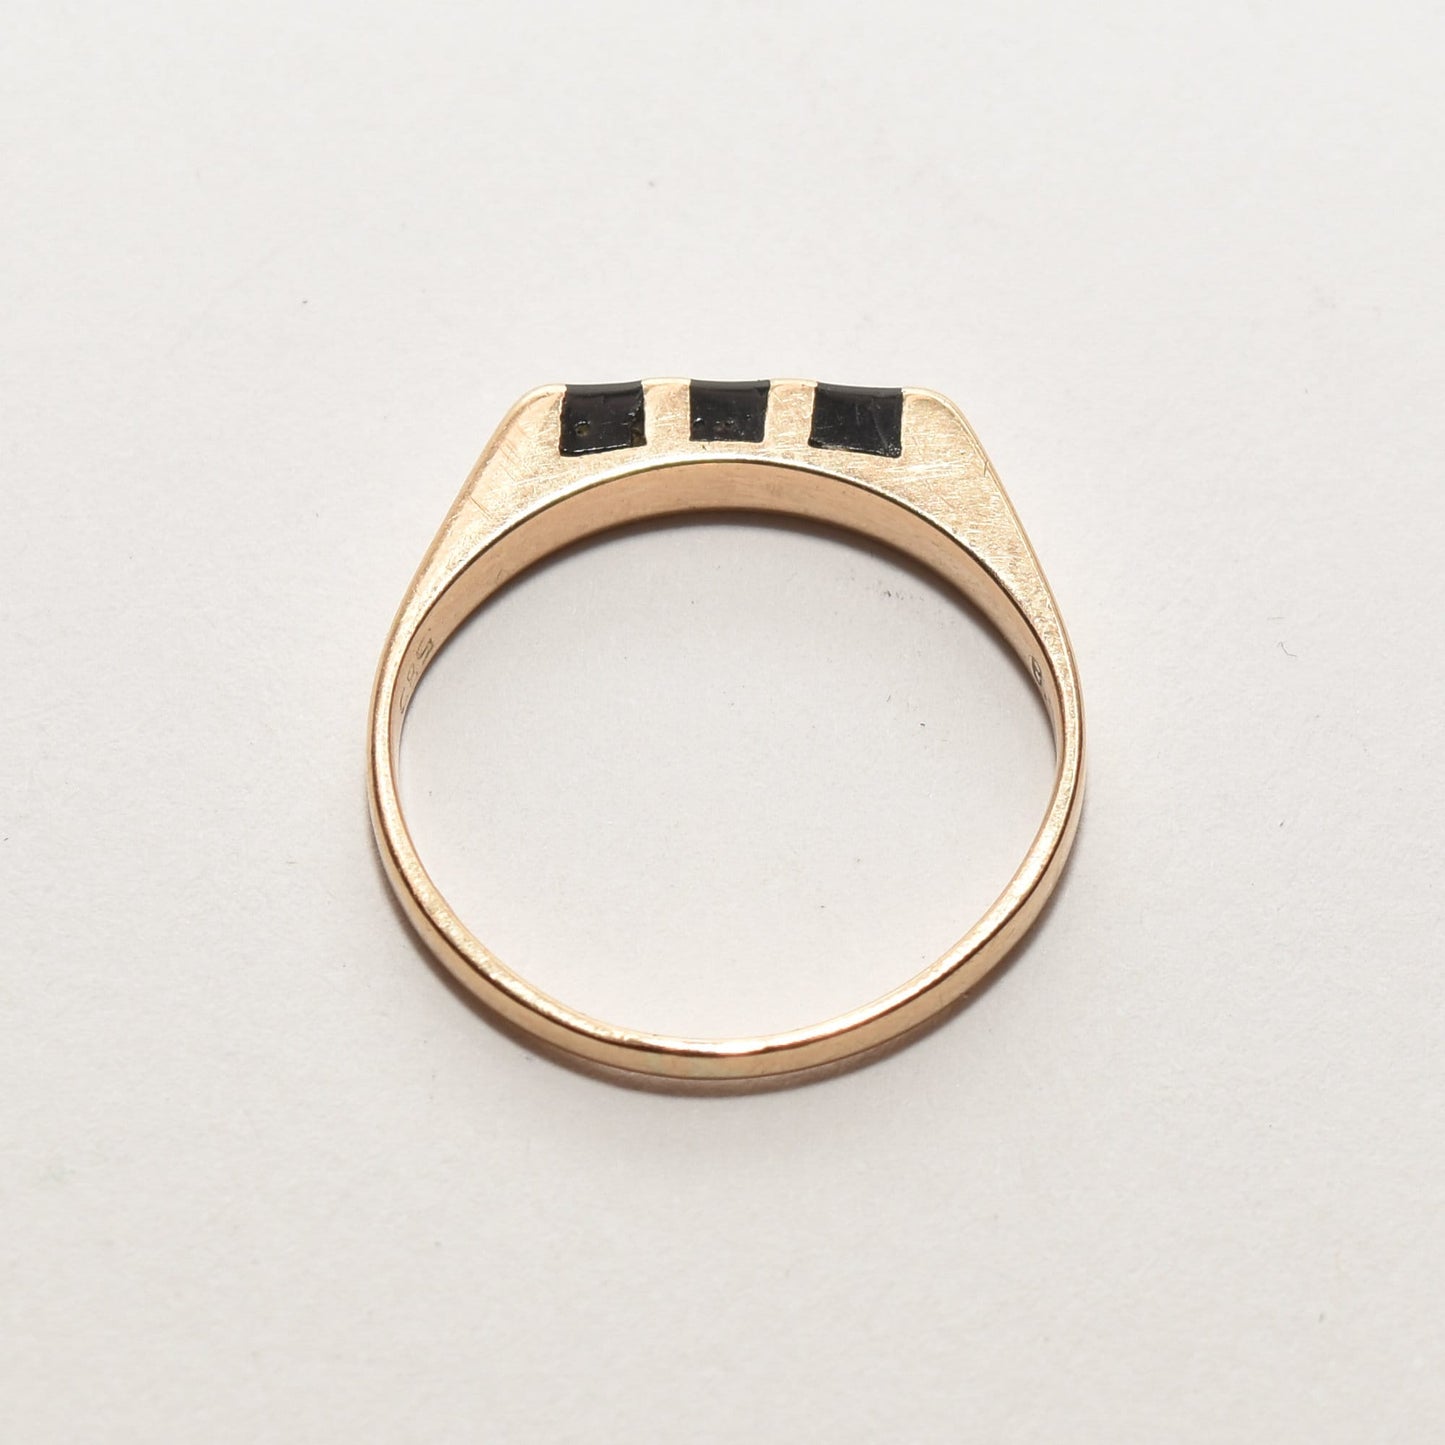 Minimalist 14K yellow gold stacking ring featuring black onyx inlay, size 5.5 US, displayed on a white background